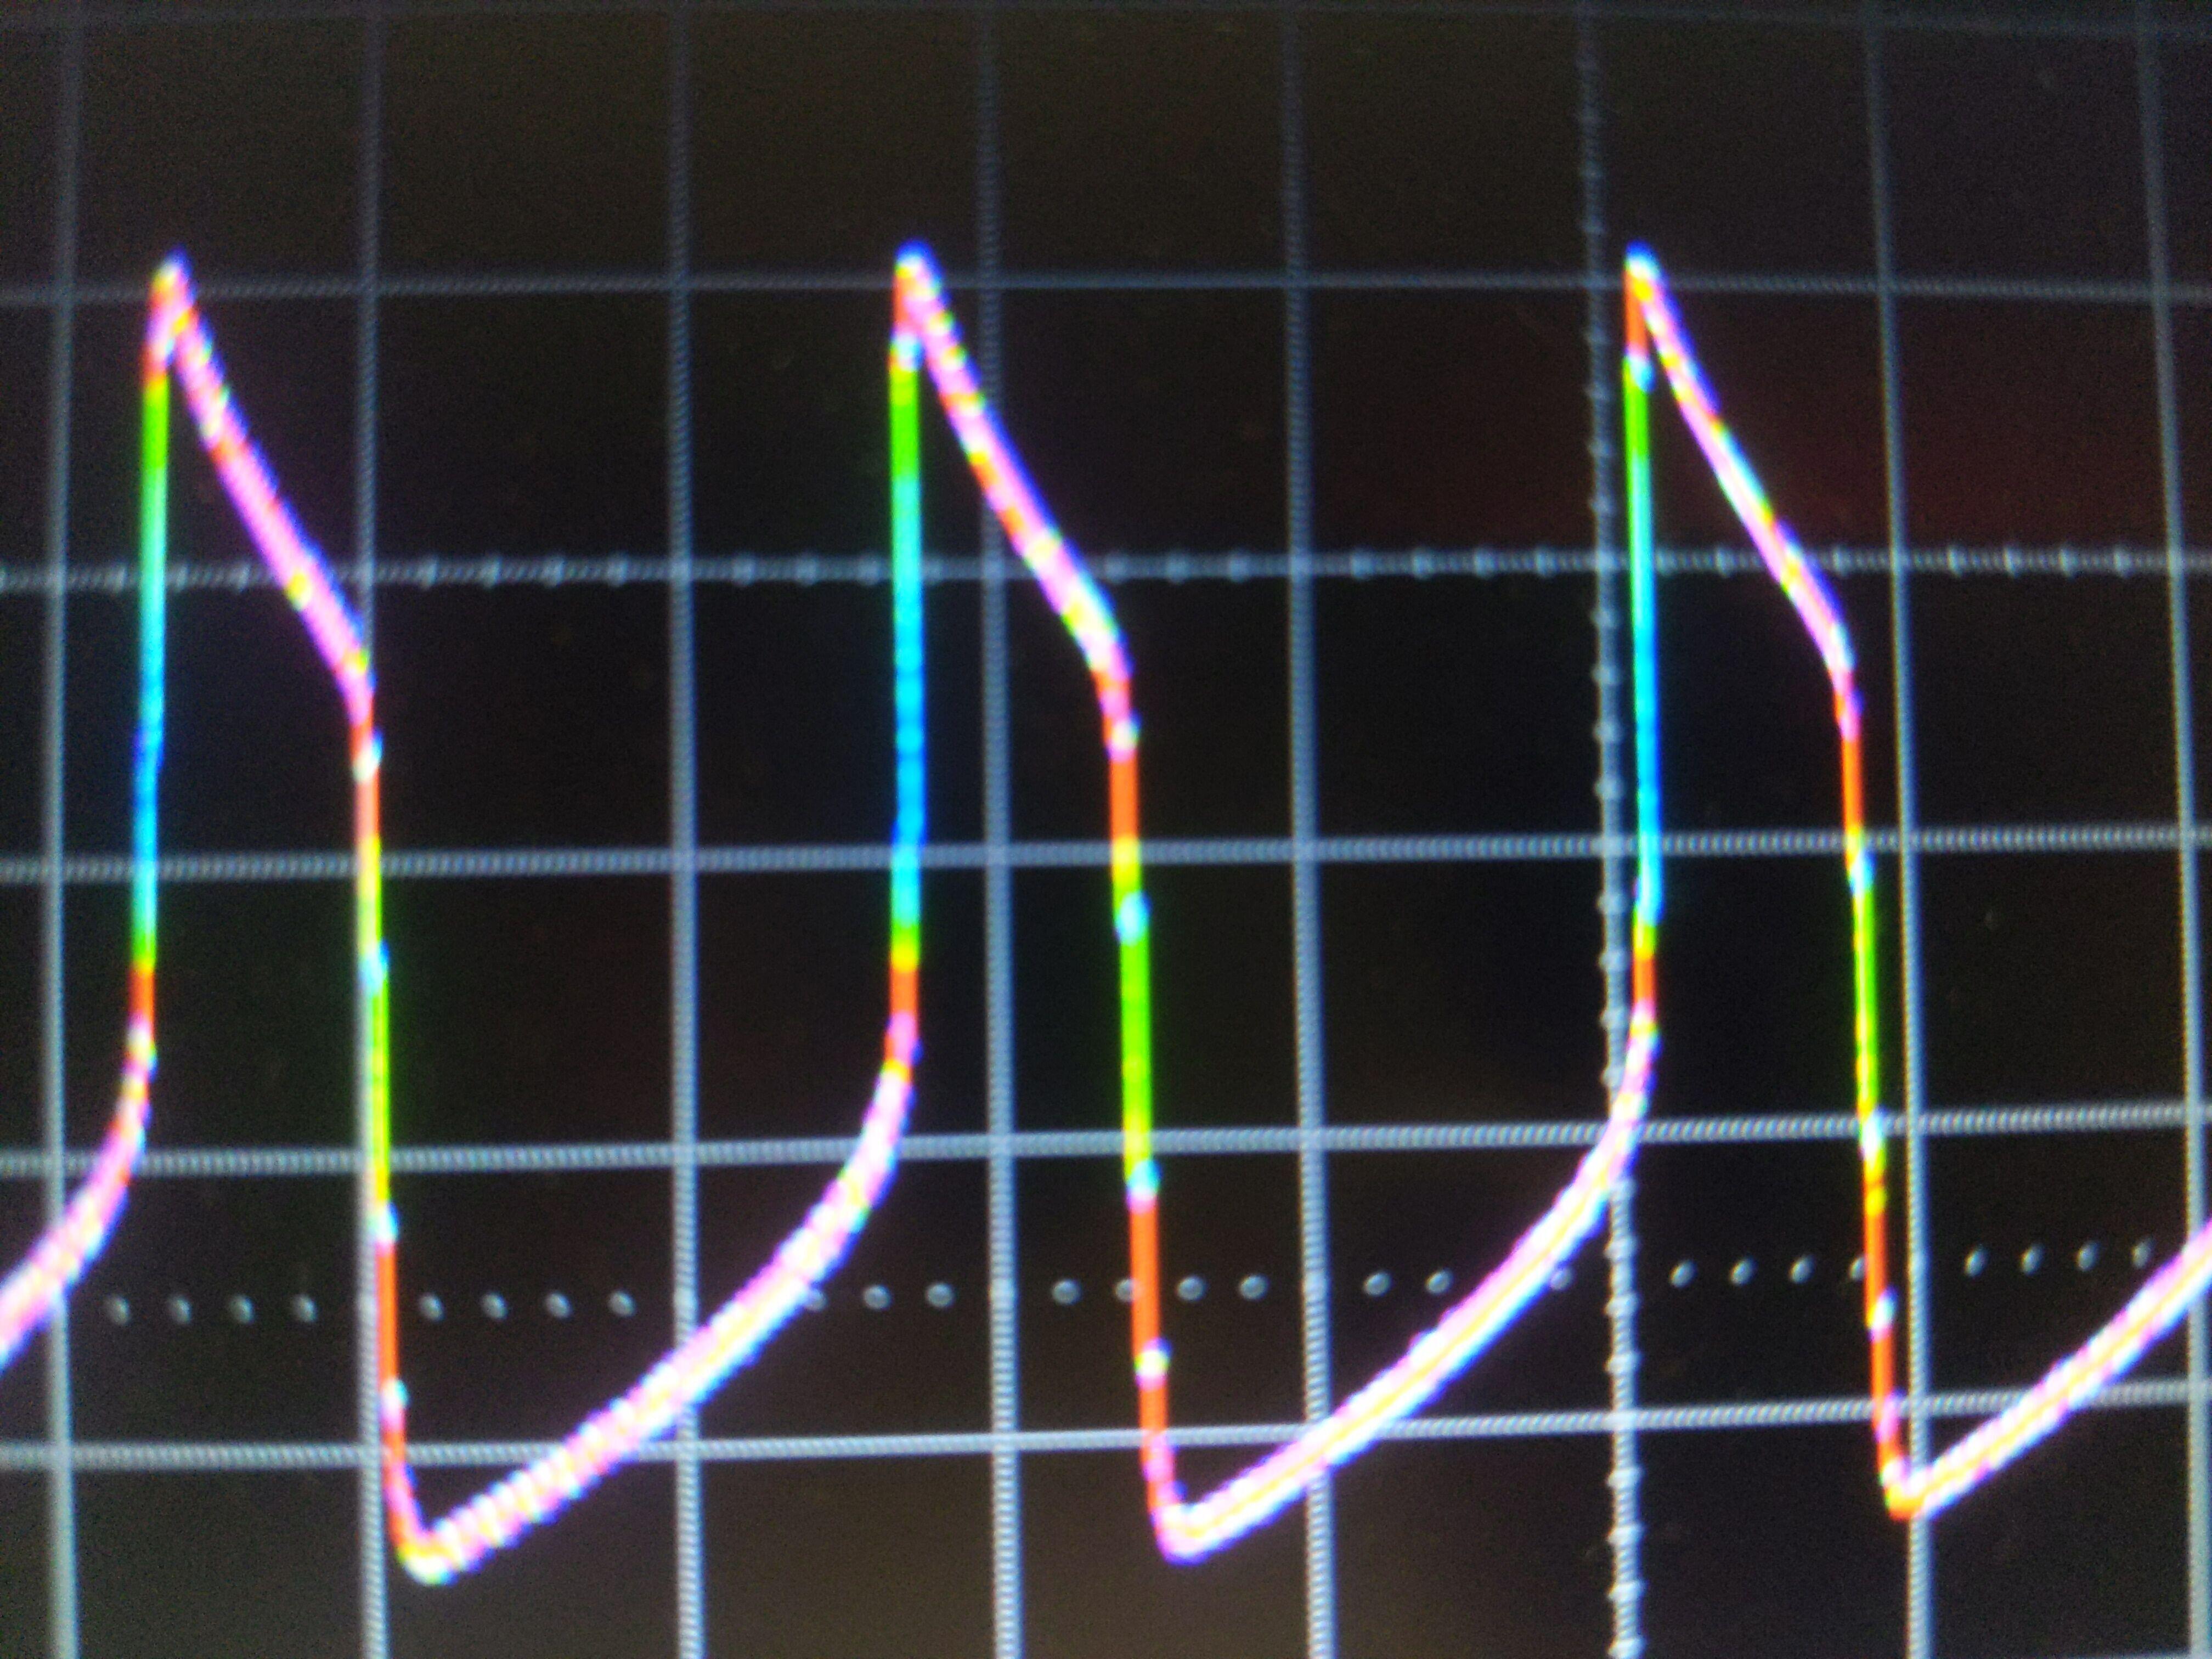 waveform from drone on oscilloscope